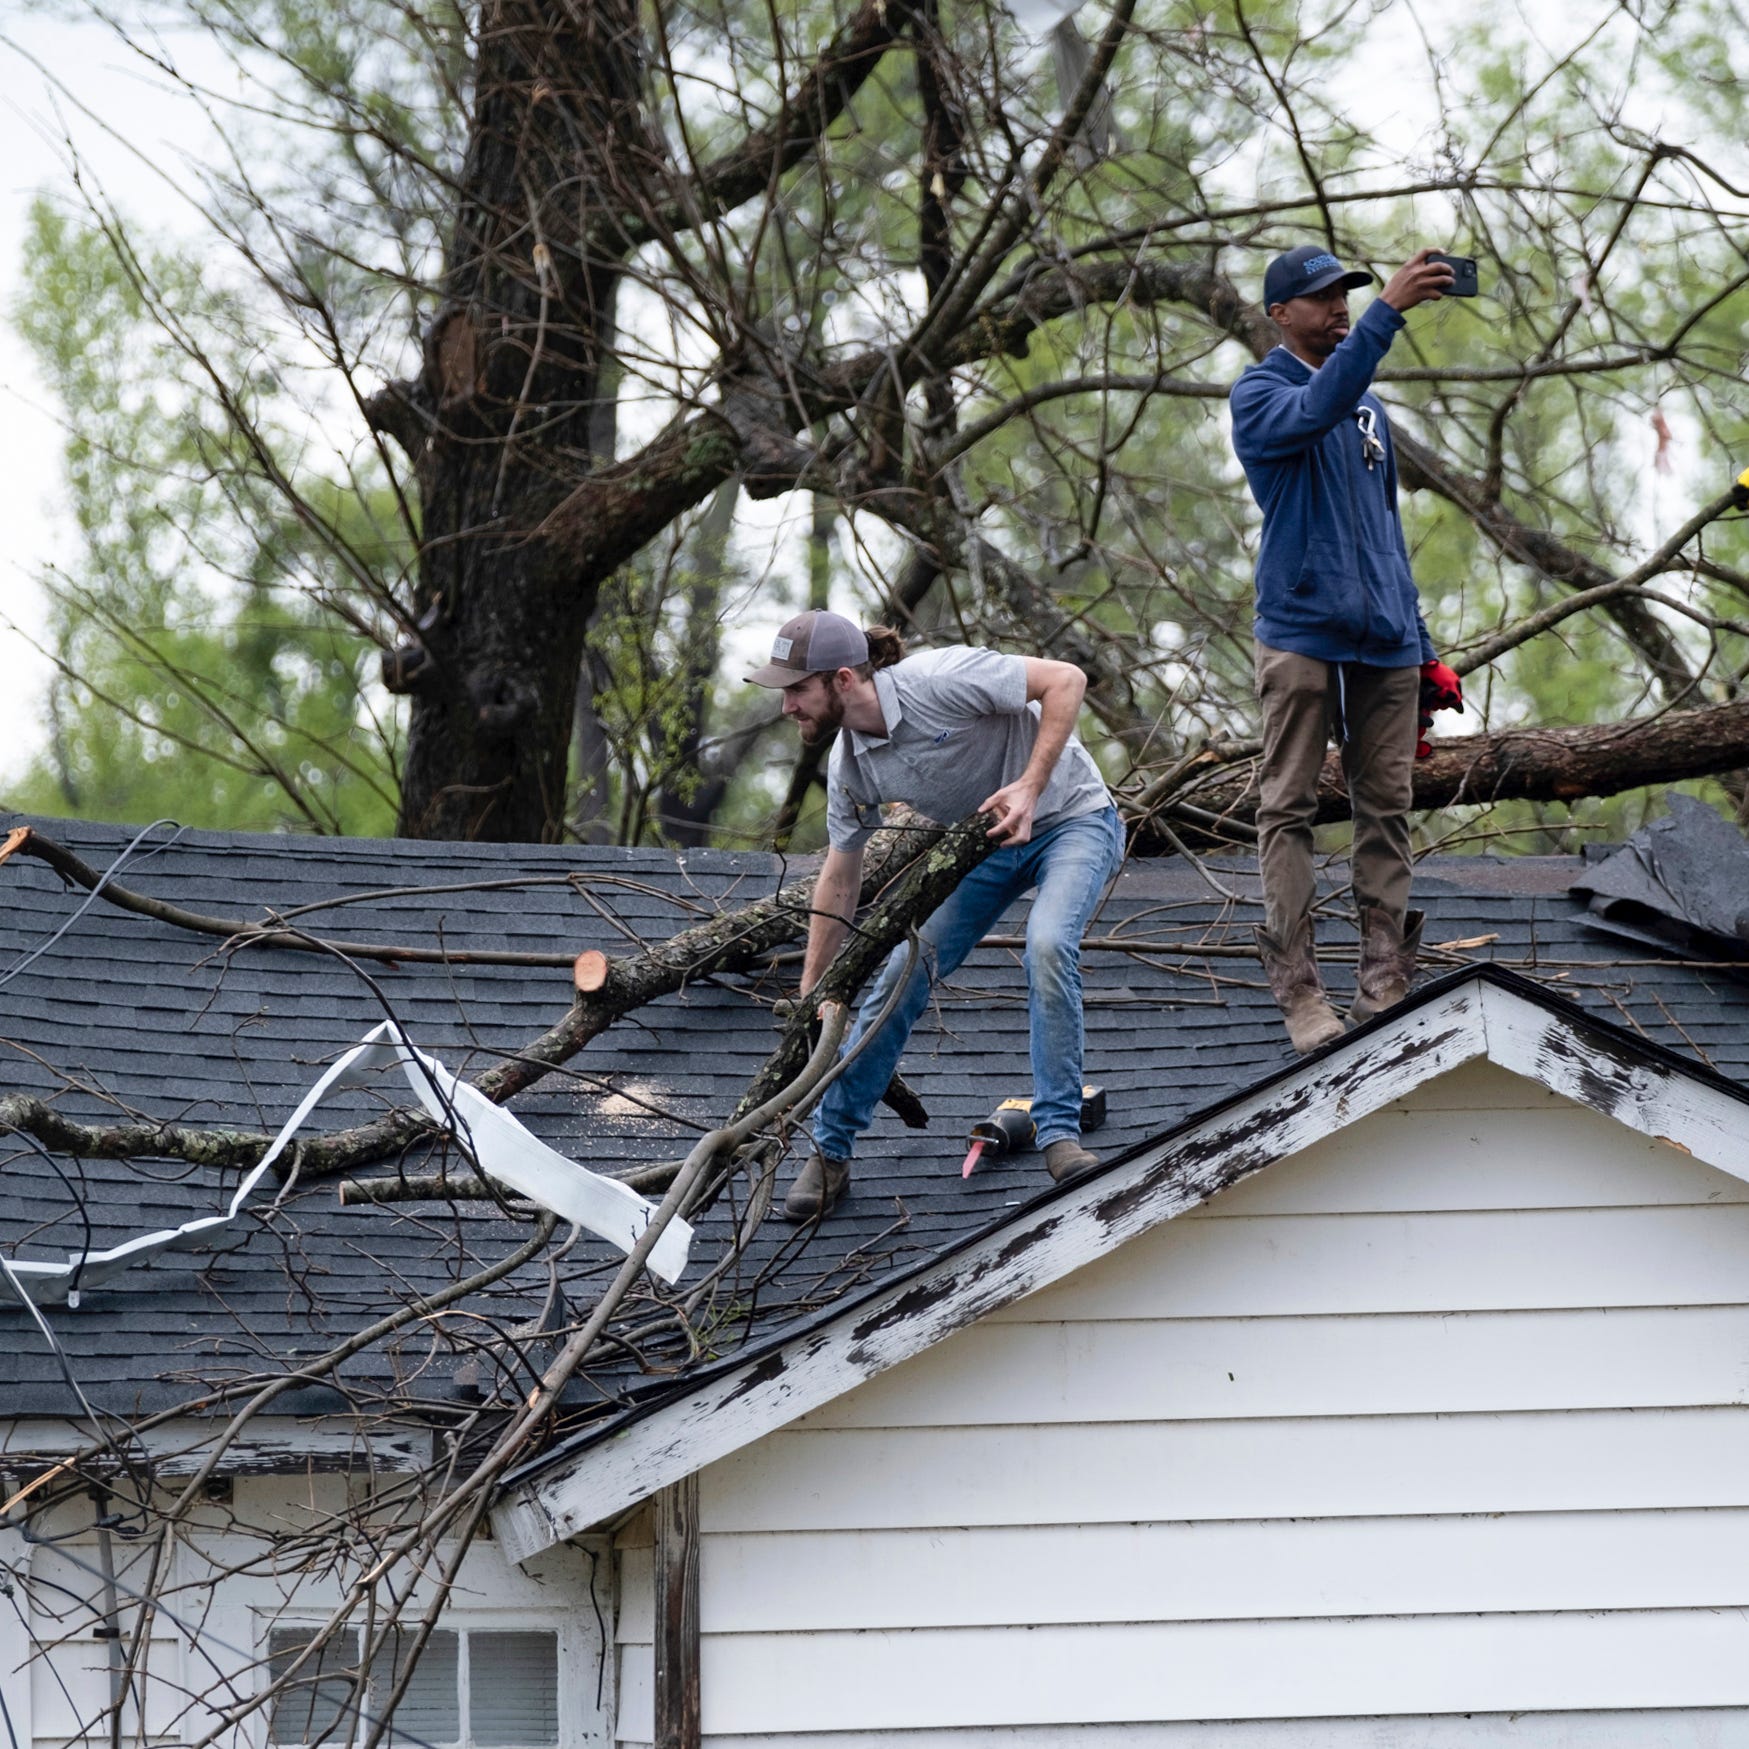 Men clear tree branches off a rooftop on Monday, March 27, 2023, after a tornado ripped through the area the day before, in West Point, Ga. (Ben Gray/Atlanta Journal-Constitution via AP) ORG XMIT: GAATJ113